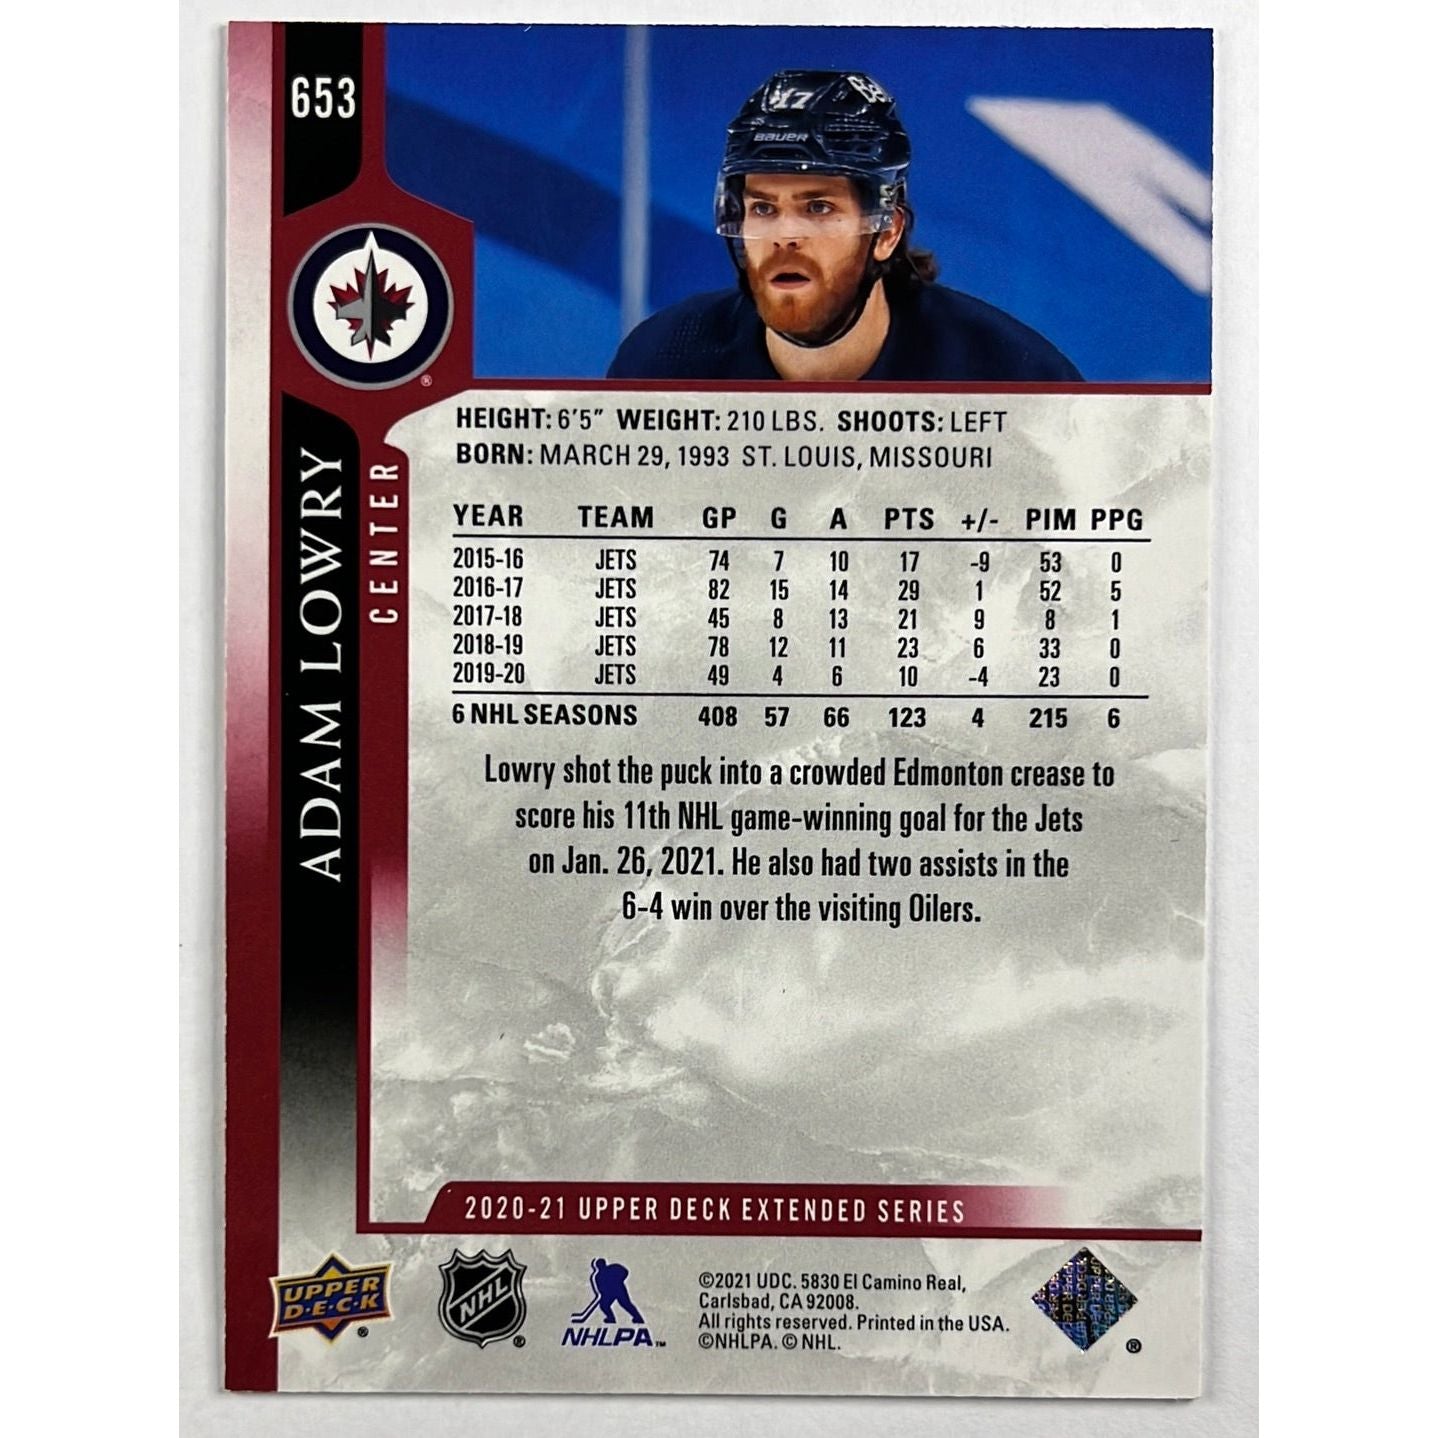 2020-21 Extended Series Adam Lowry UD Exclusives 50/100